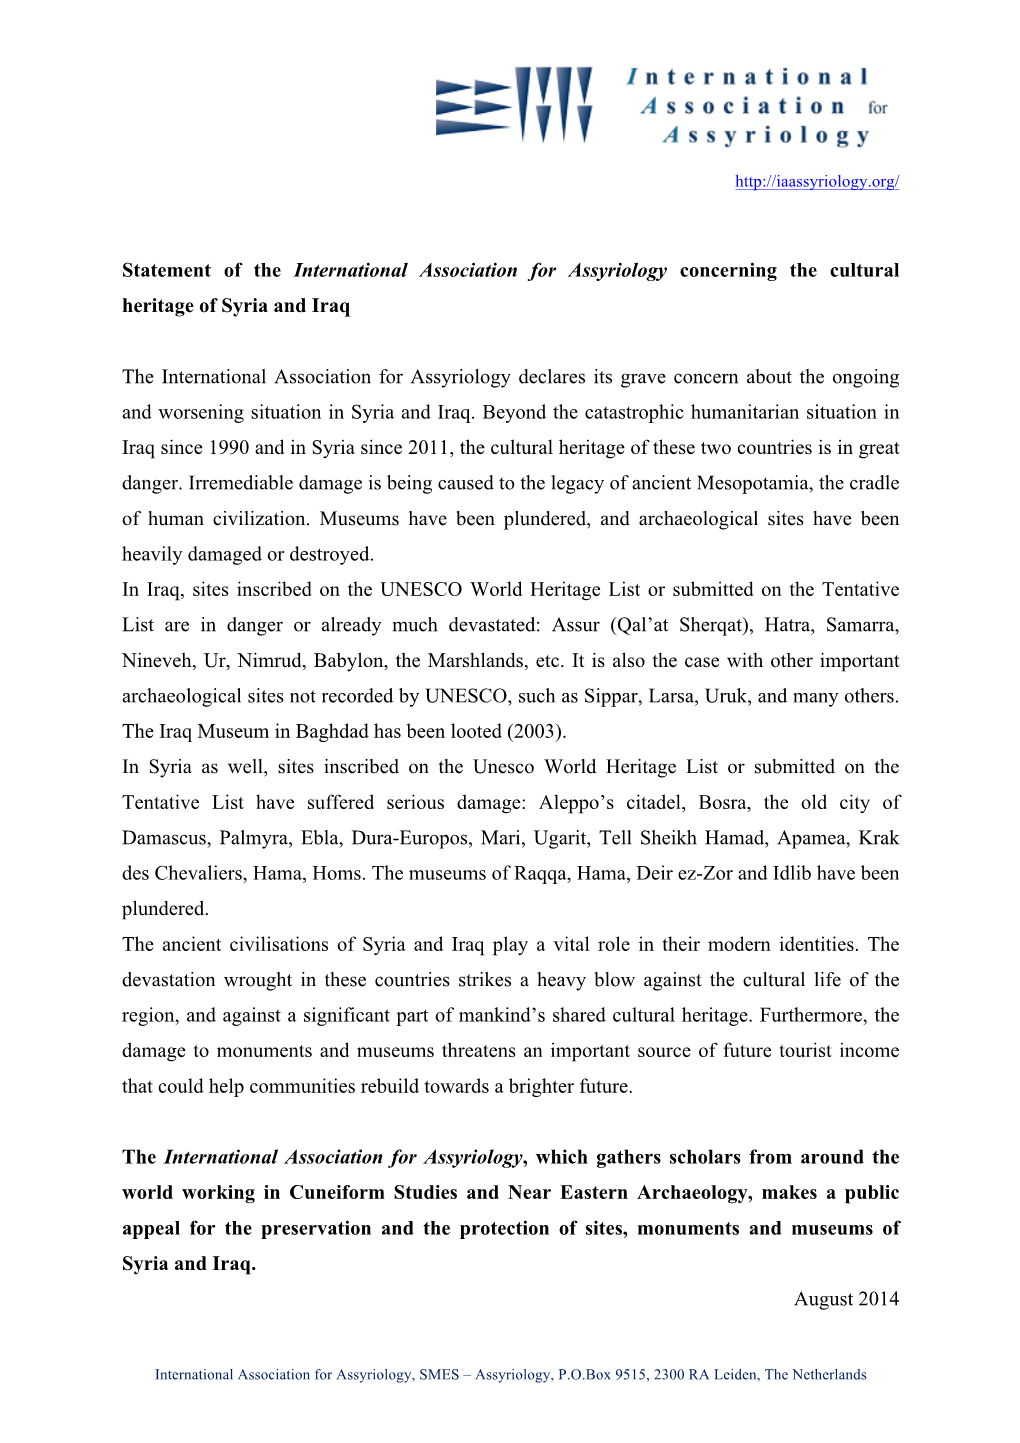 Statement of the International Association for Assyriology Concerning the Cultural Heritage of Syria and Iraq